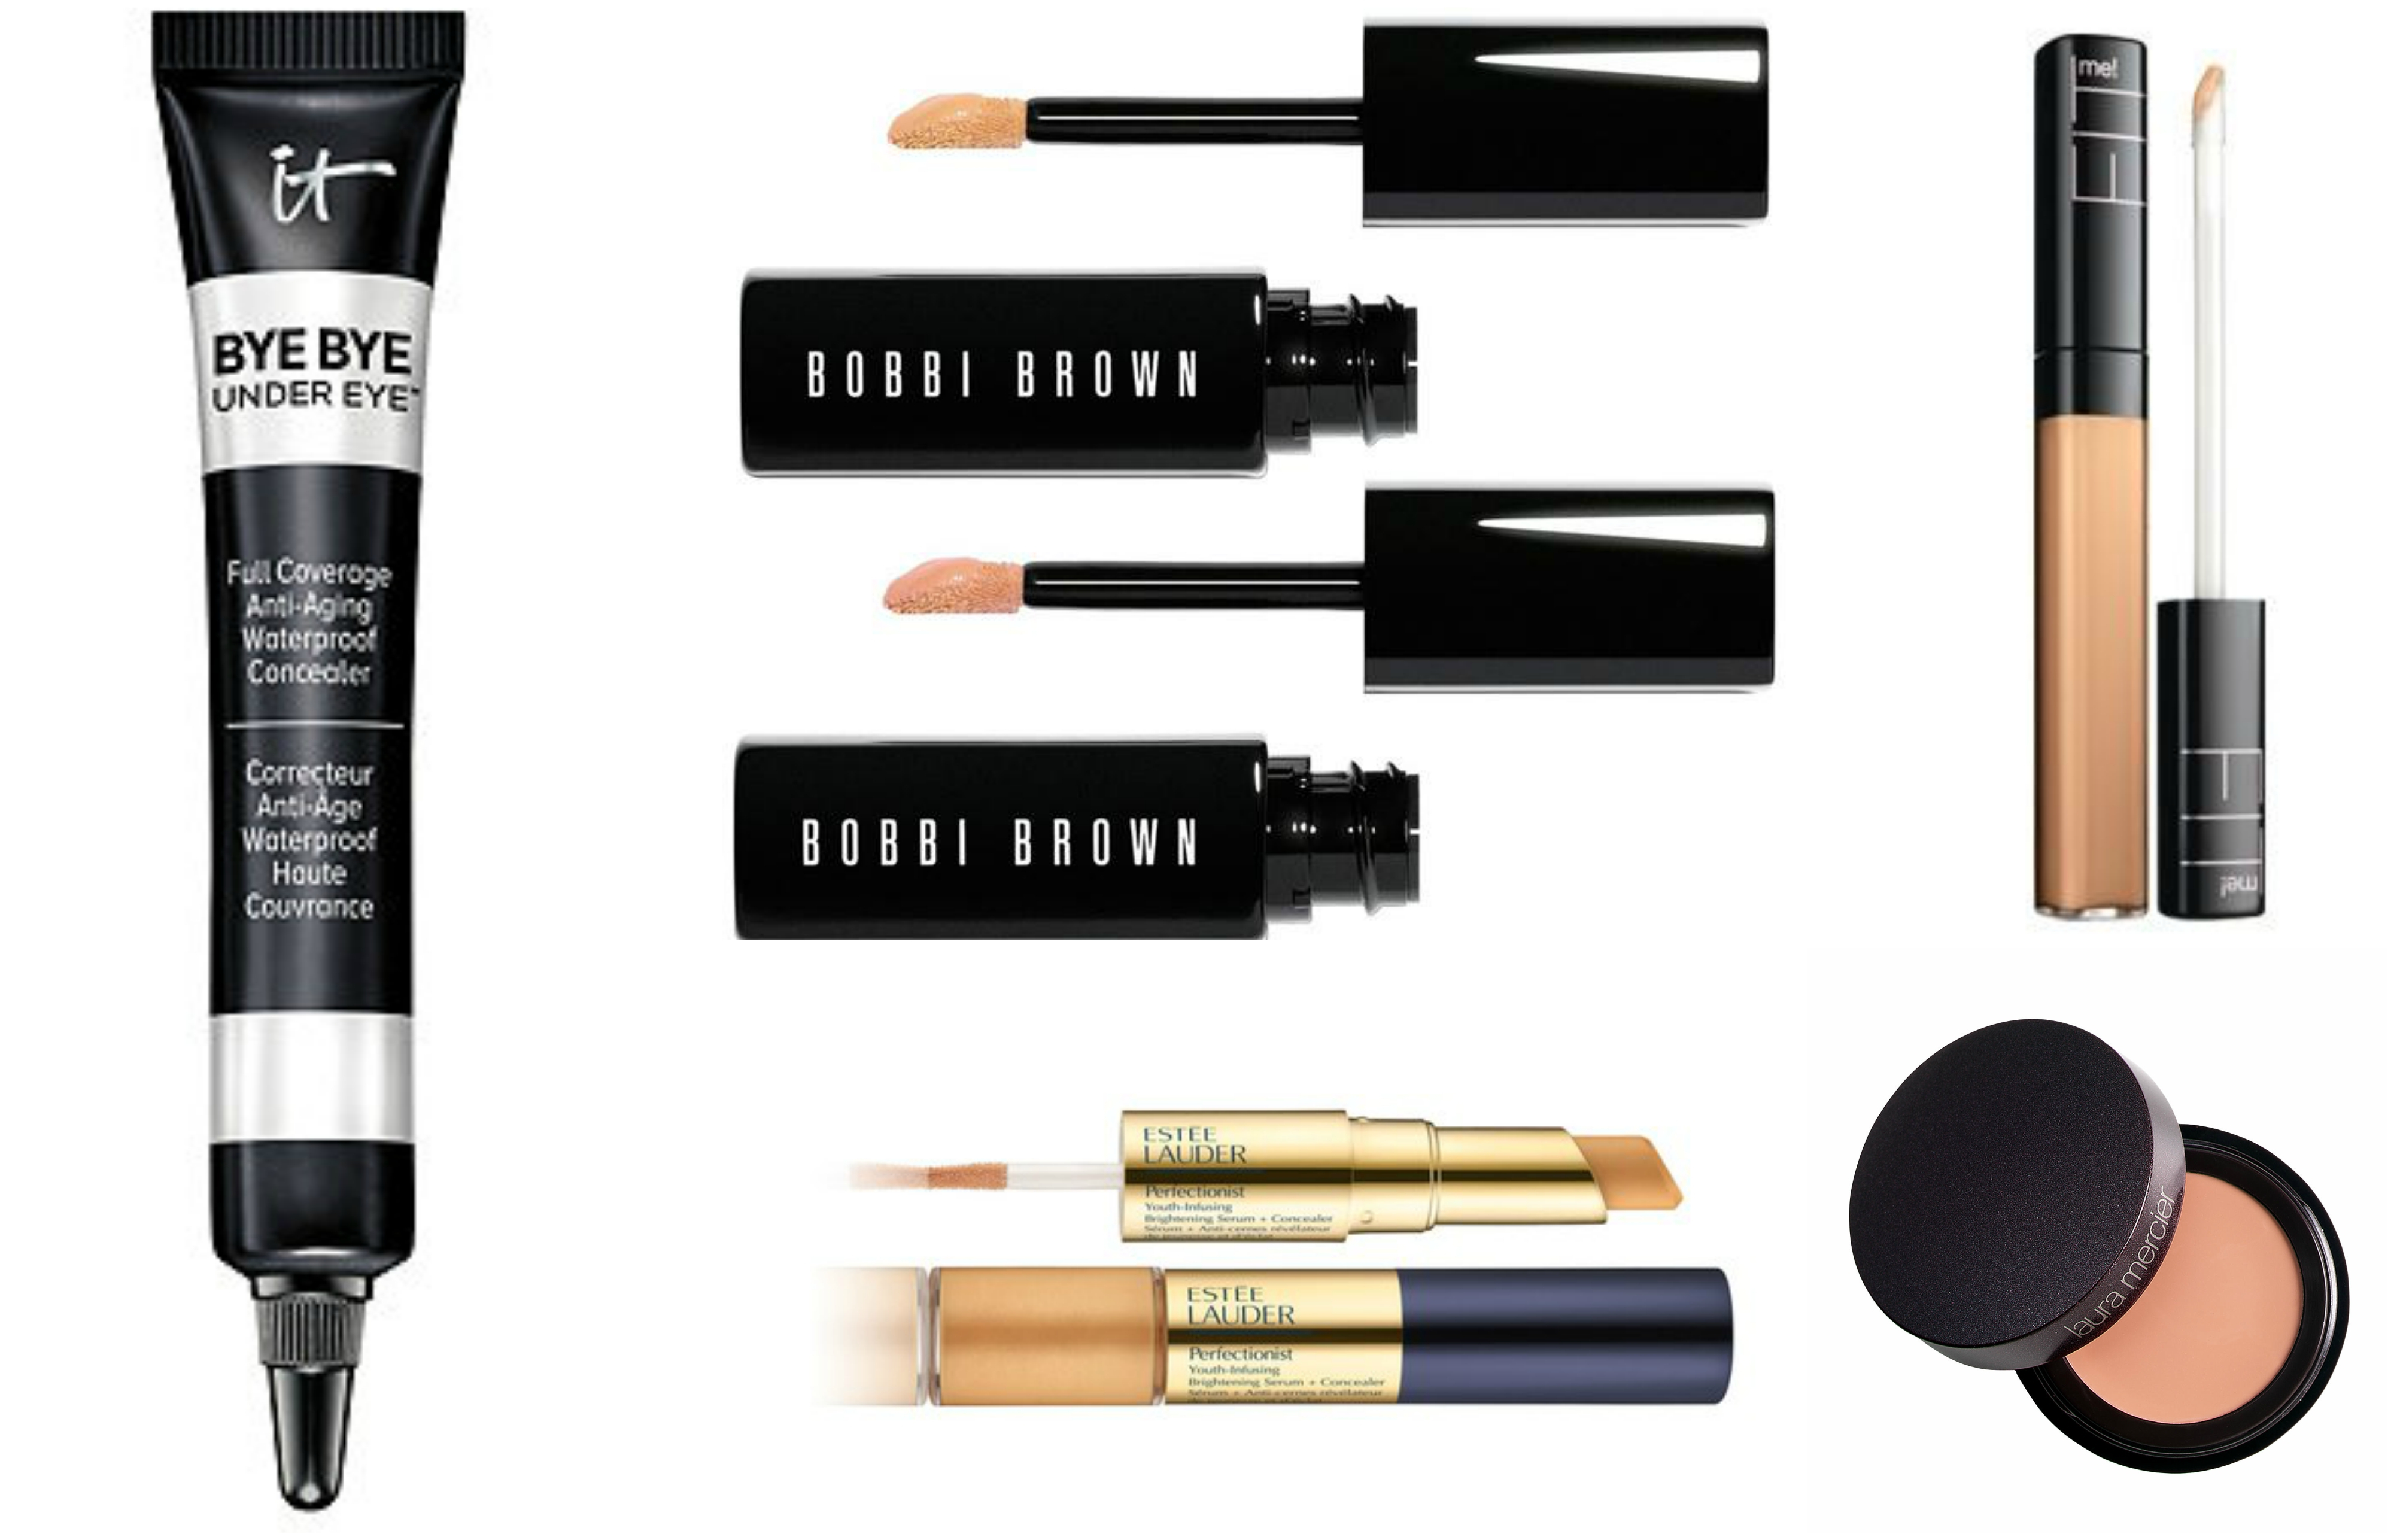 Best Under Eye Makeup The Best Hydrating Under Eye Concealers For Dry Or Mature Skin